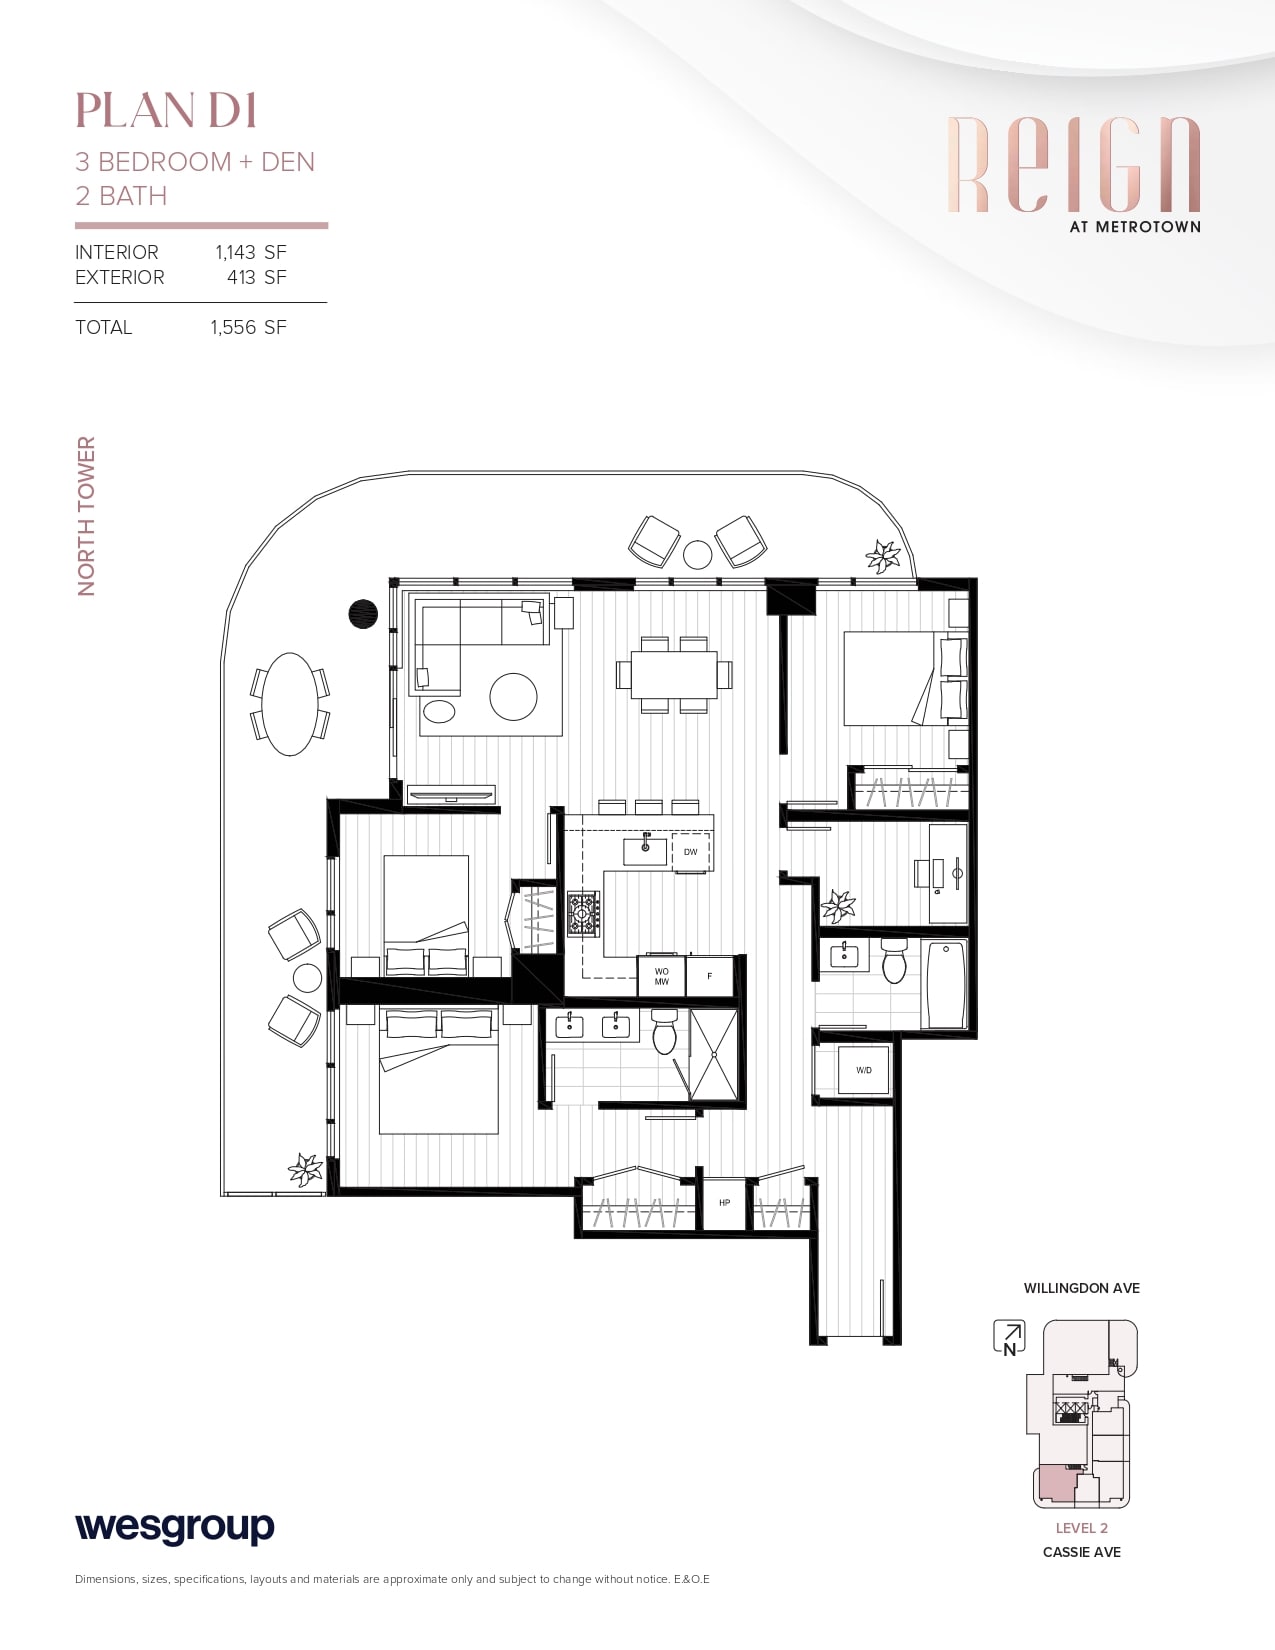 Reign_-_North_Tower_-_Typical_Floorplans_-_FINAL__page-0020-min.jpg